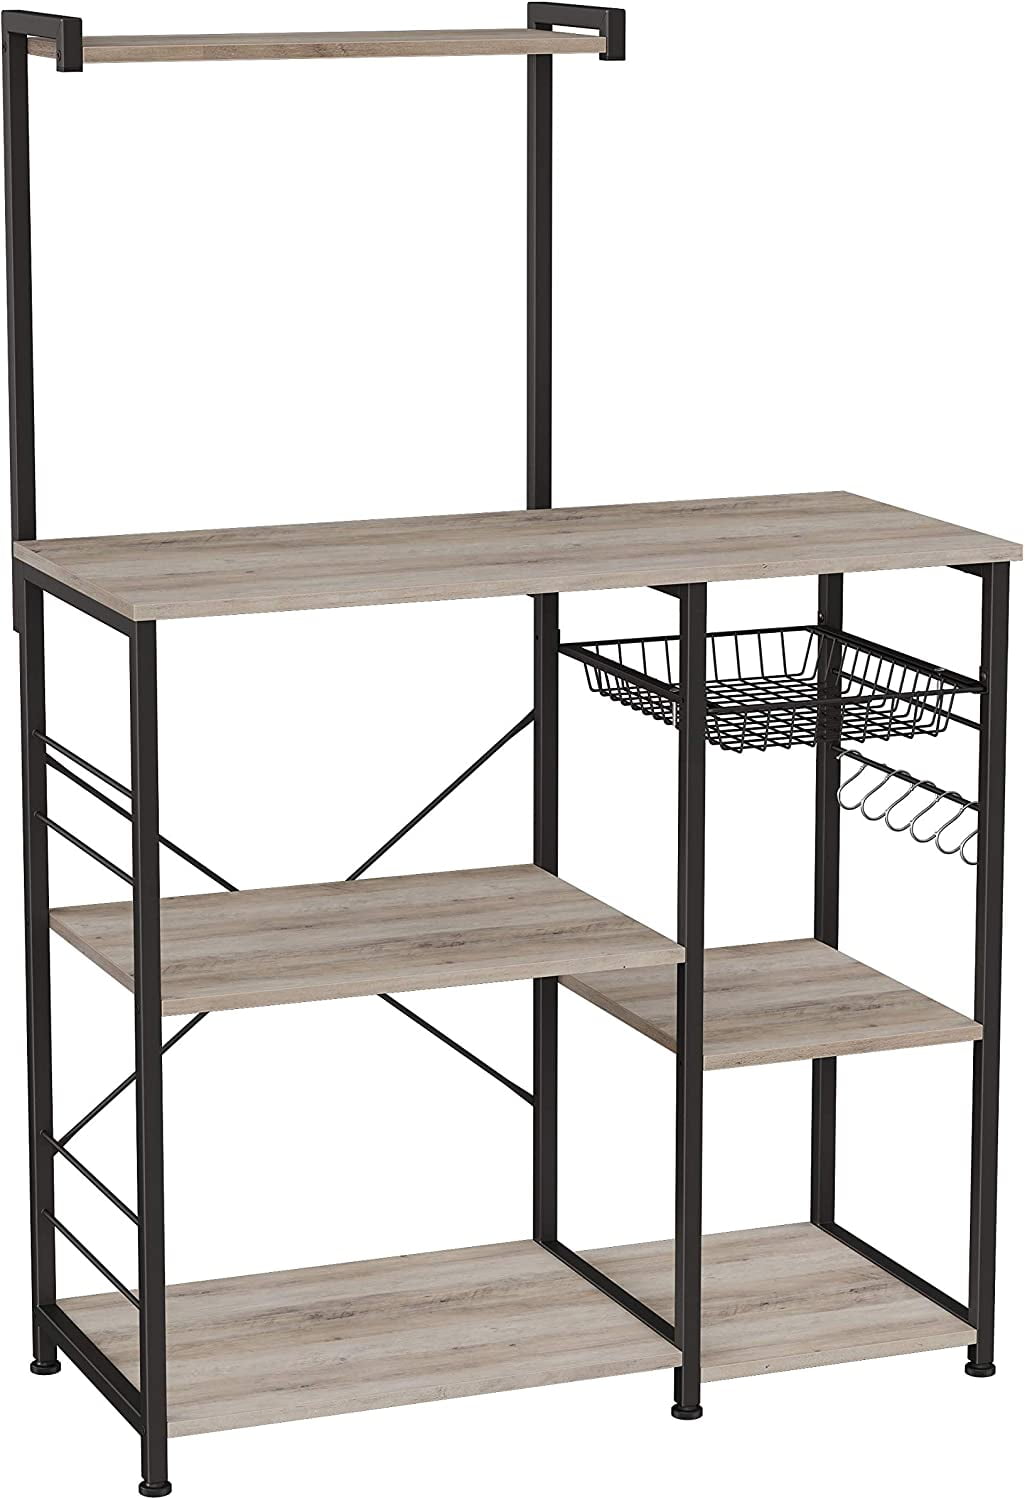 Grid Panel VASAGLE Baker’s Rack Coffee Station Rustic Brown and Black UKKS020B01 Kitchen Utility Storage Shelf with Cupboard Microwave Oven Stand Open Shelves Industrial Style 10 Hooks 